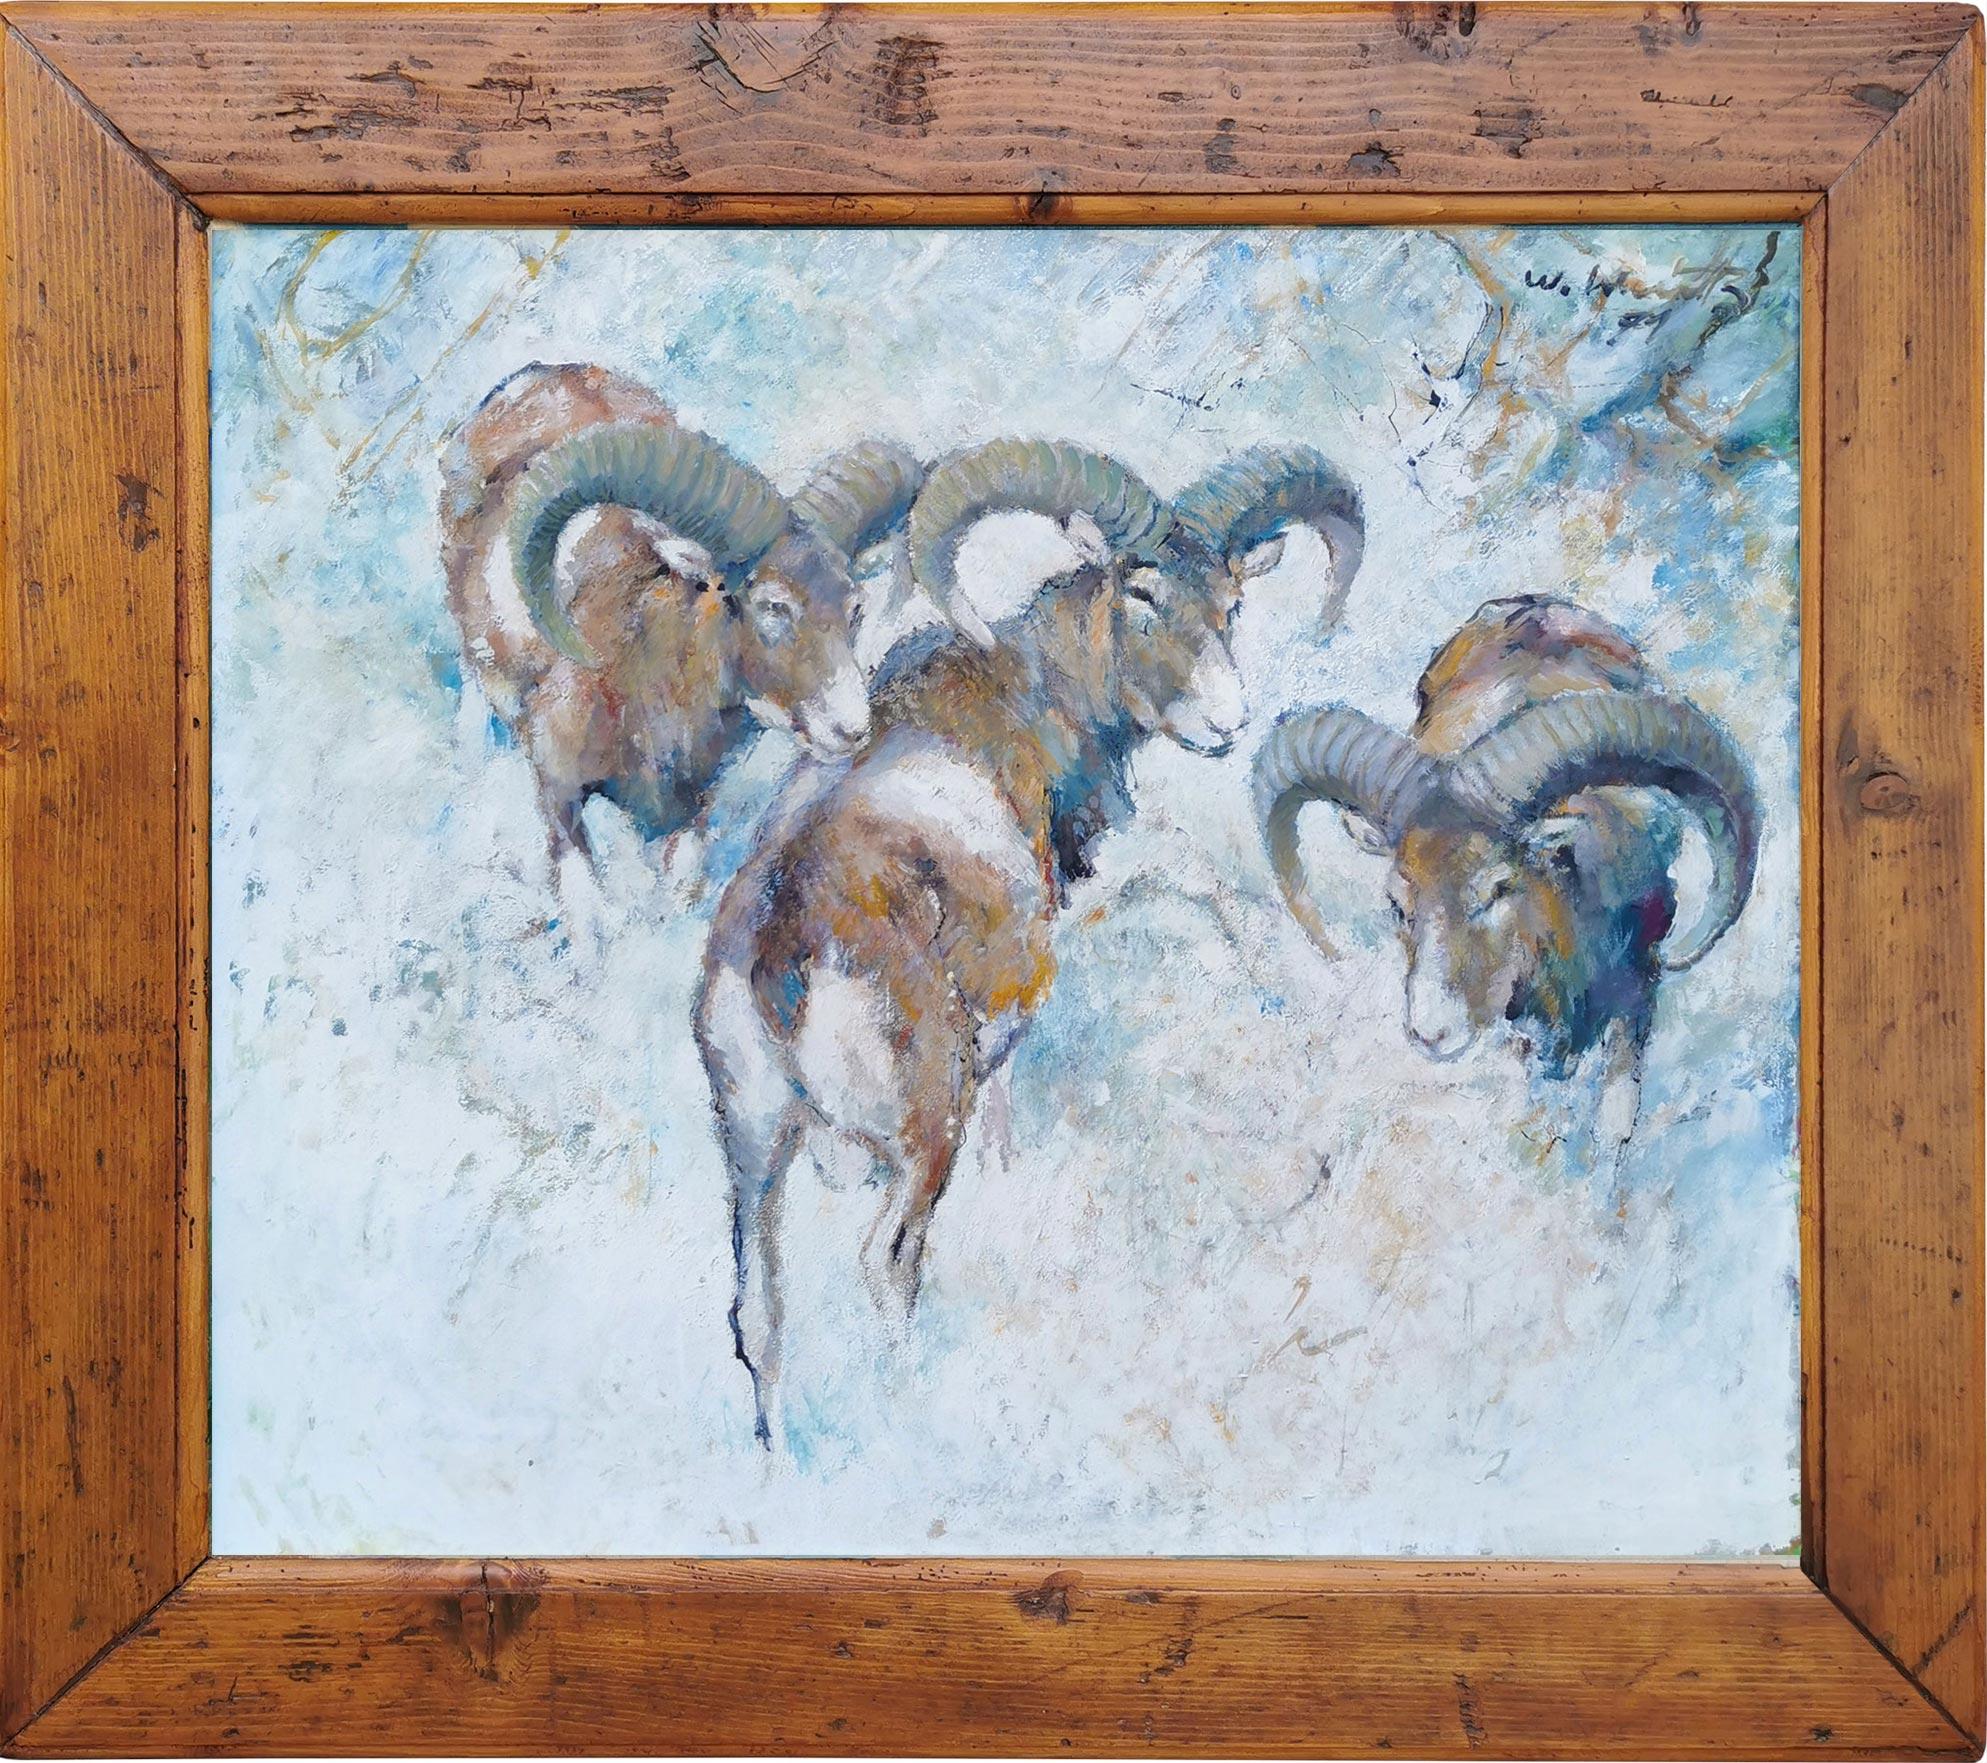 Willi Schütz (1914-1995) - Mouflons in the snow

60cm x 70cm (excluding frame)
76cm x 96cm (including frame)

Painting depicting three mouflons in the snow.

Willi Schütz Baunach 12 July 1914 - 20 October 1995

Schütz studied agriculture in